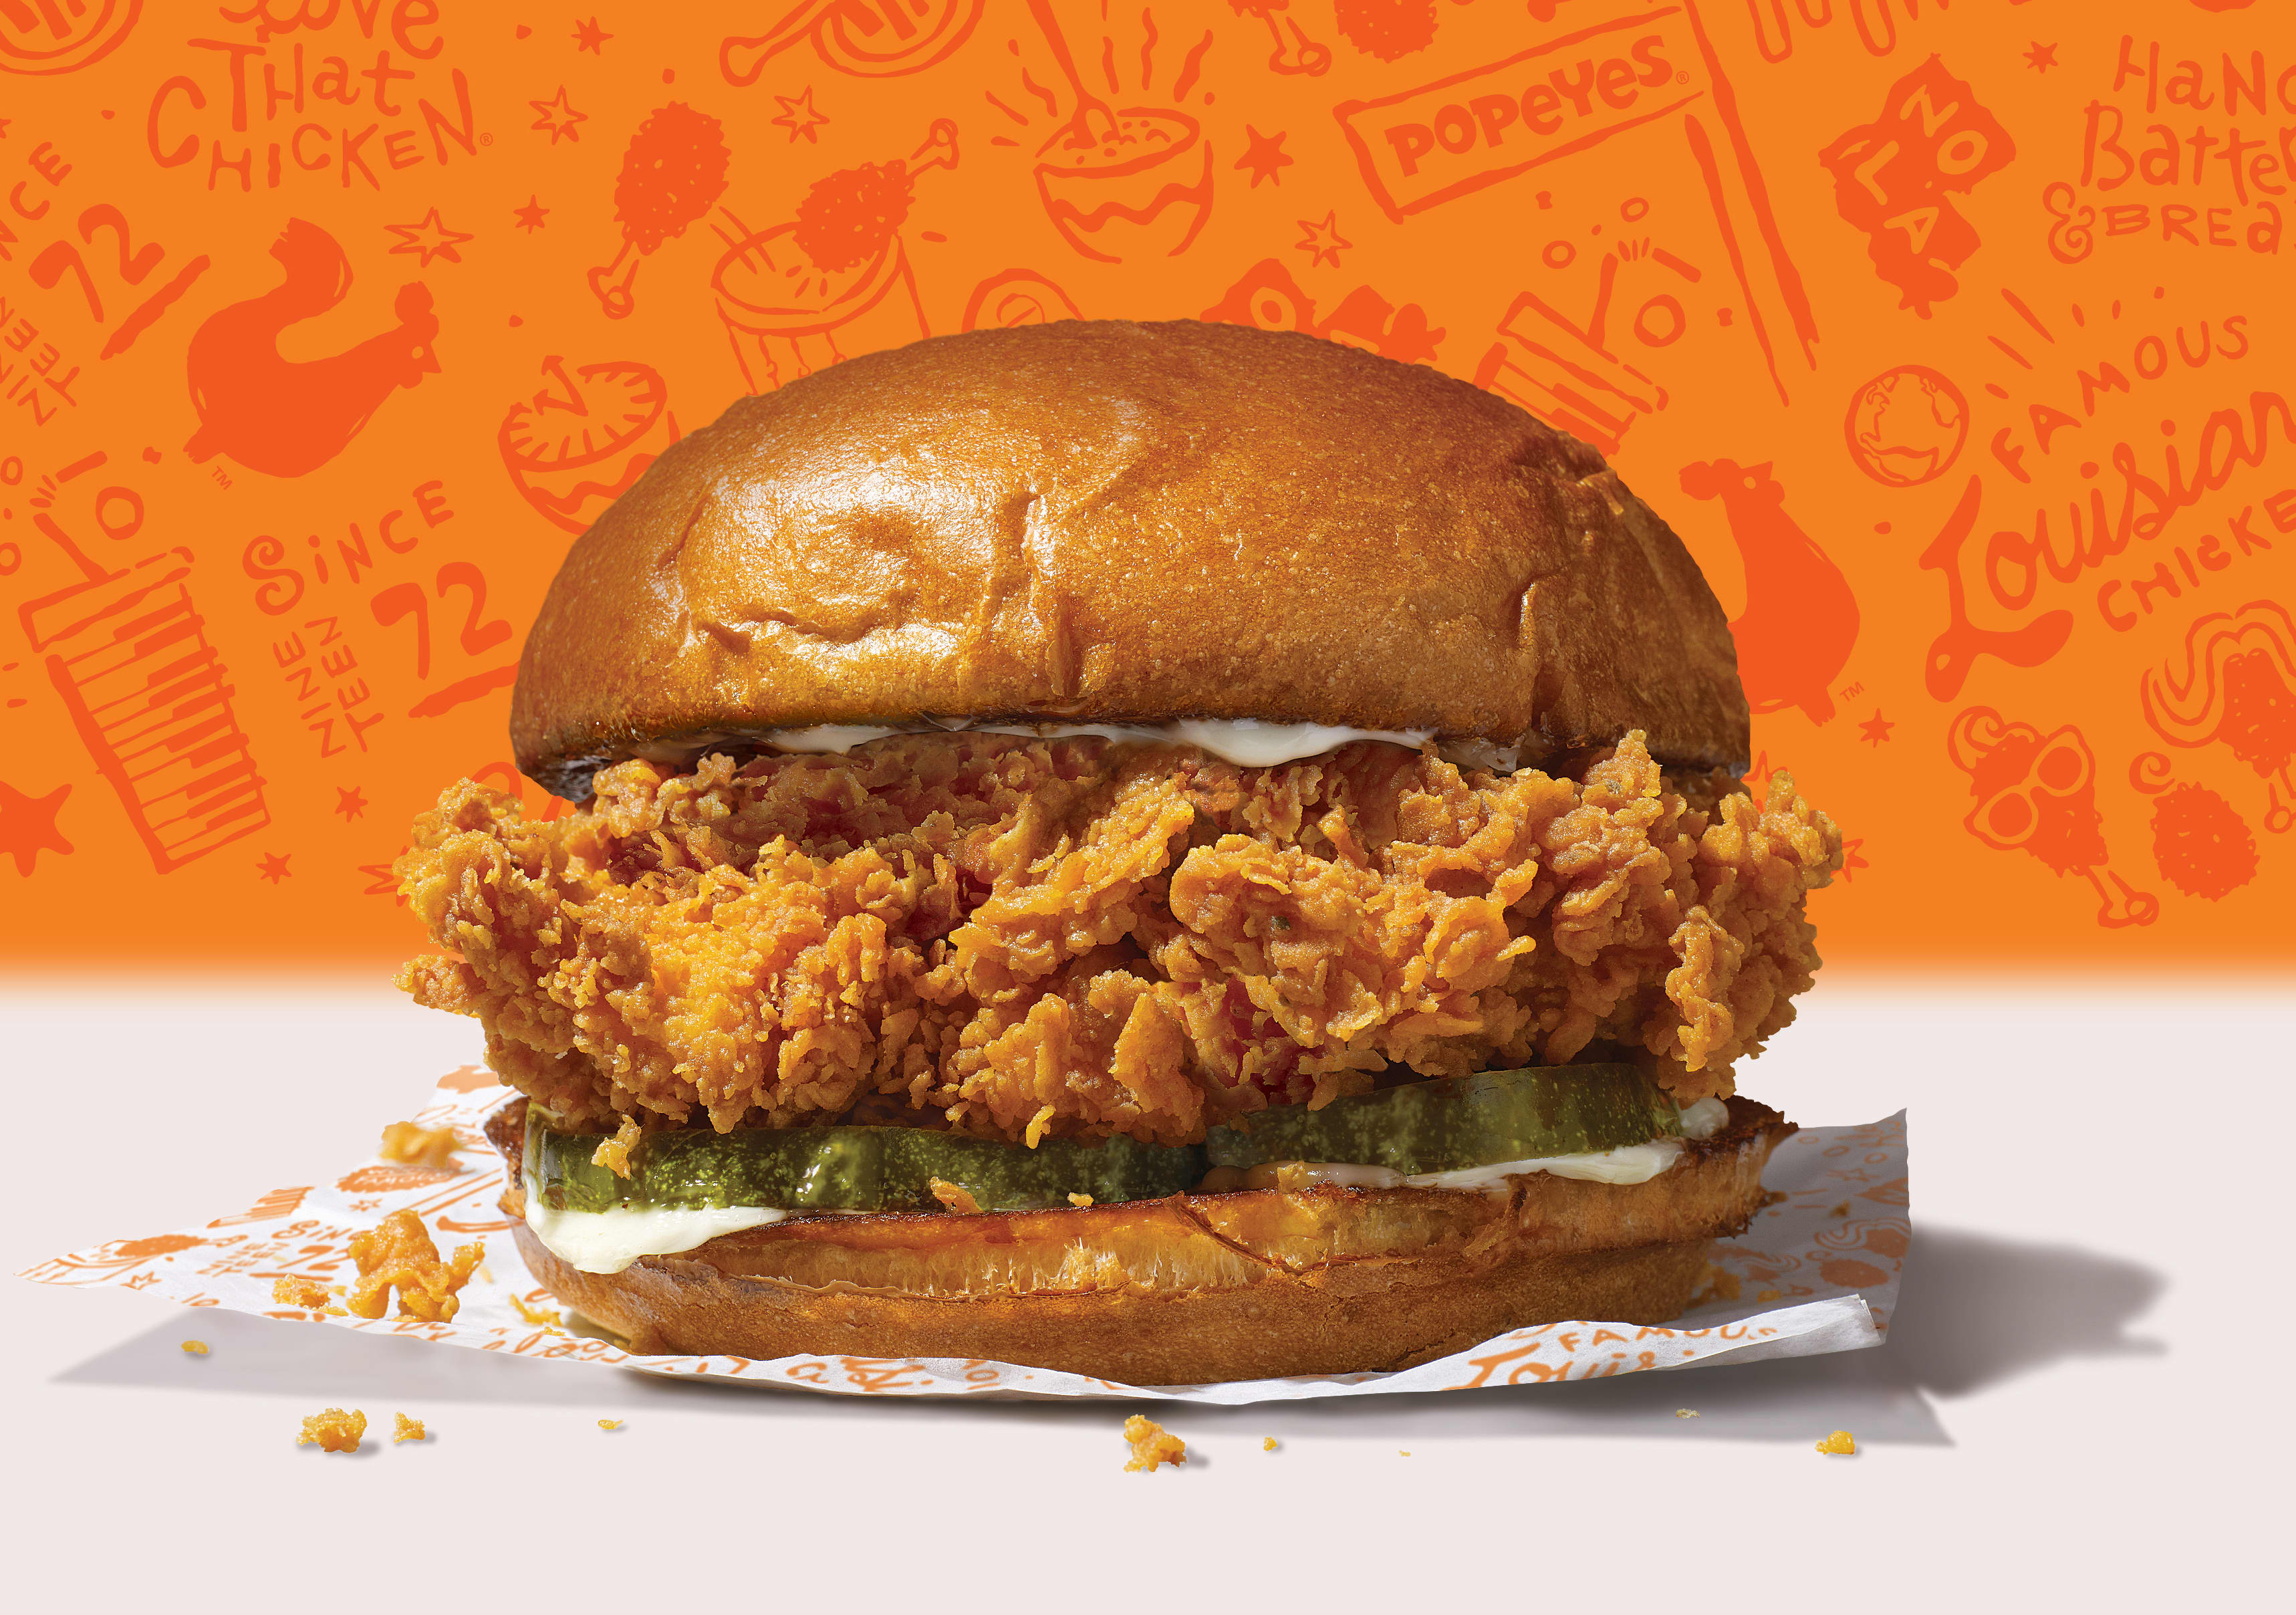 Popeyes Sold Out Of Its Chicken Sandwich In Less Than A Month